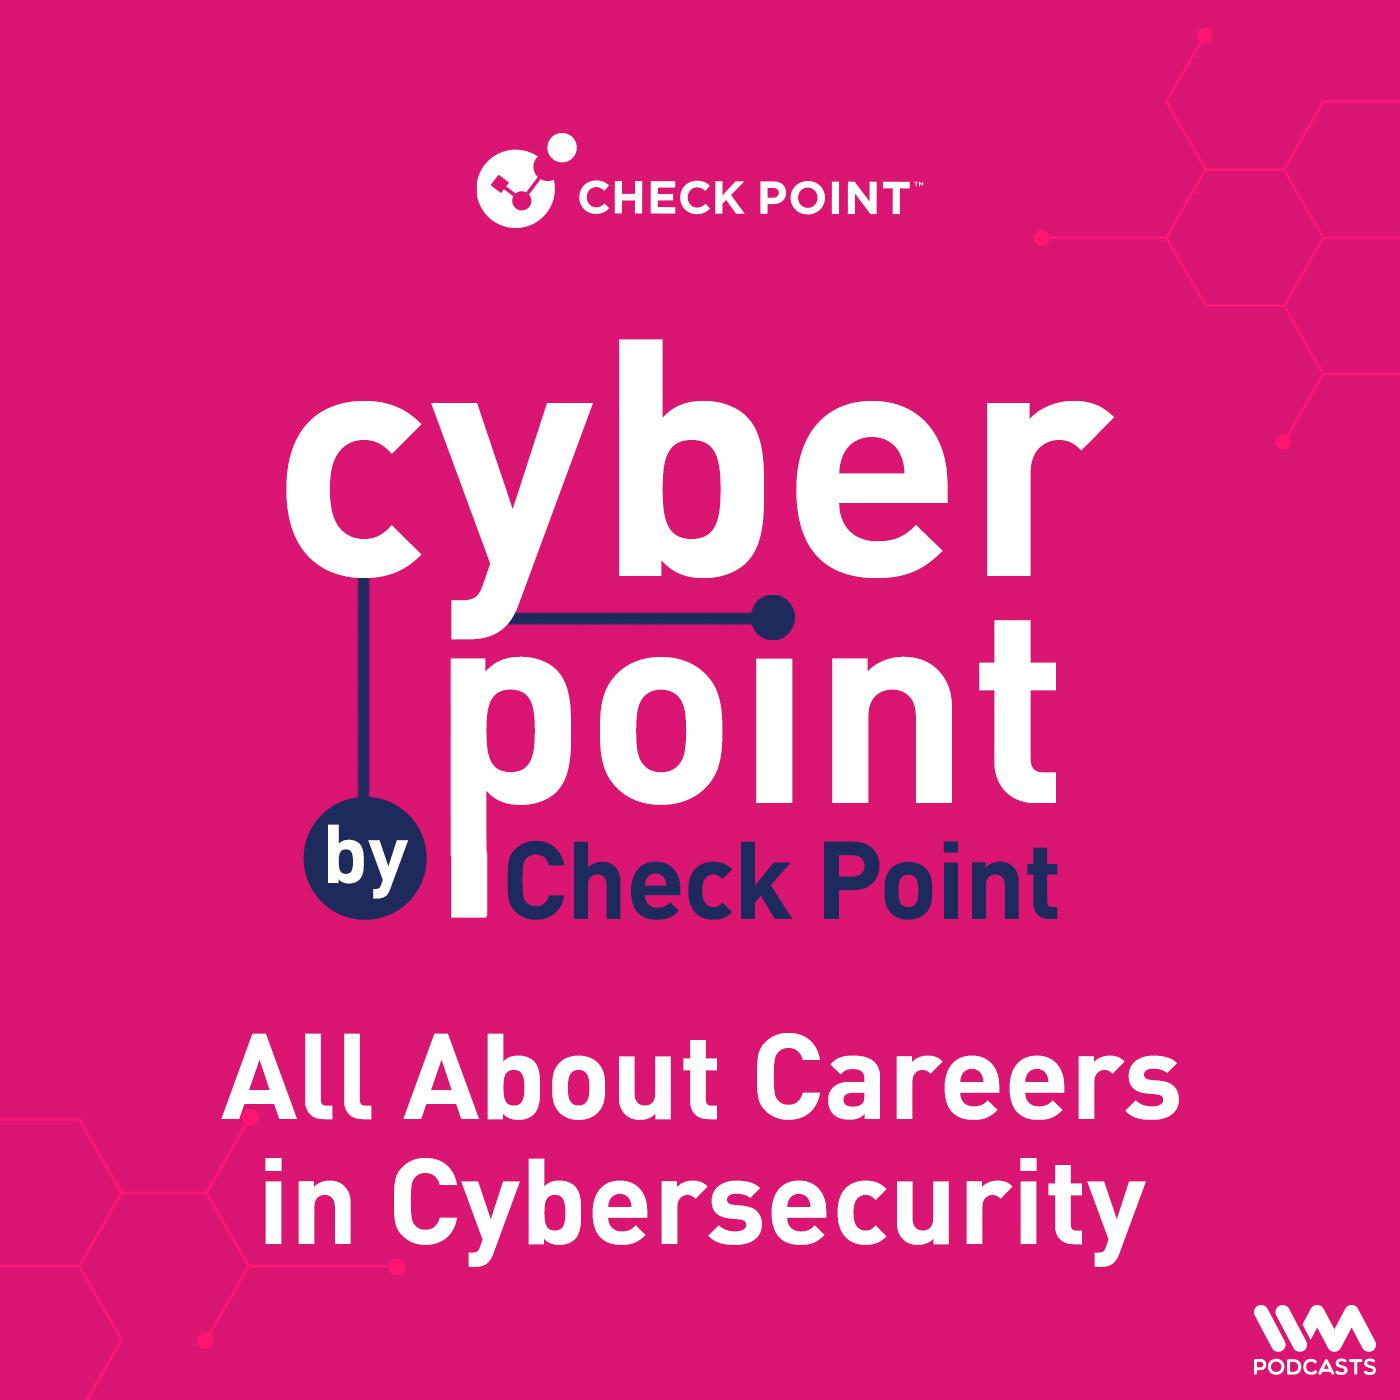 All About Careers in Cybersecurity